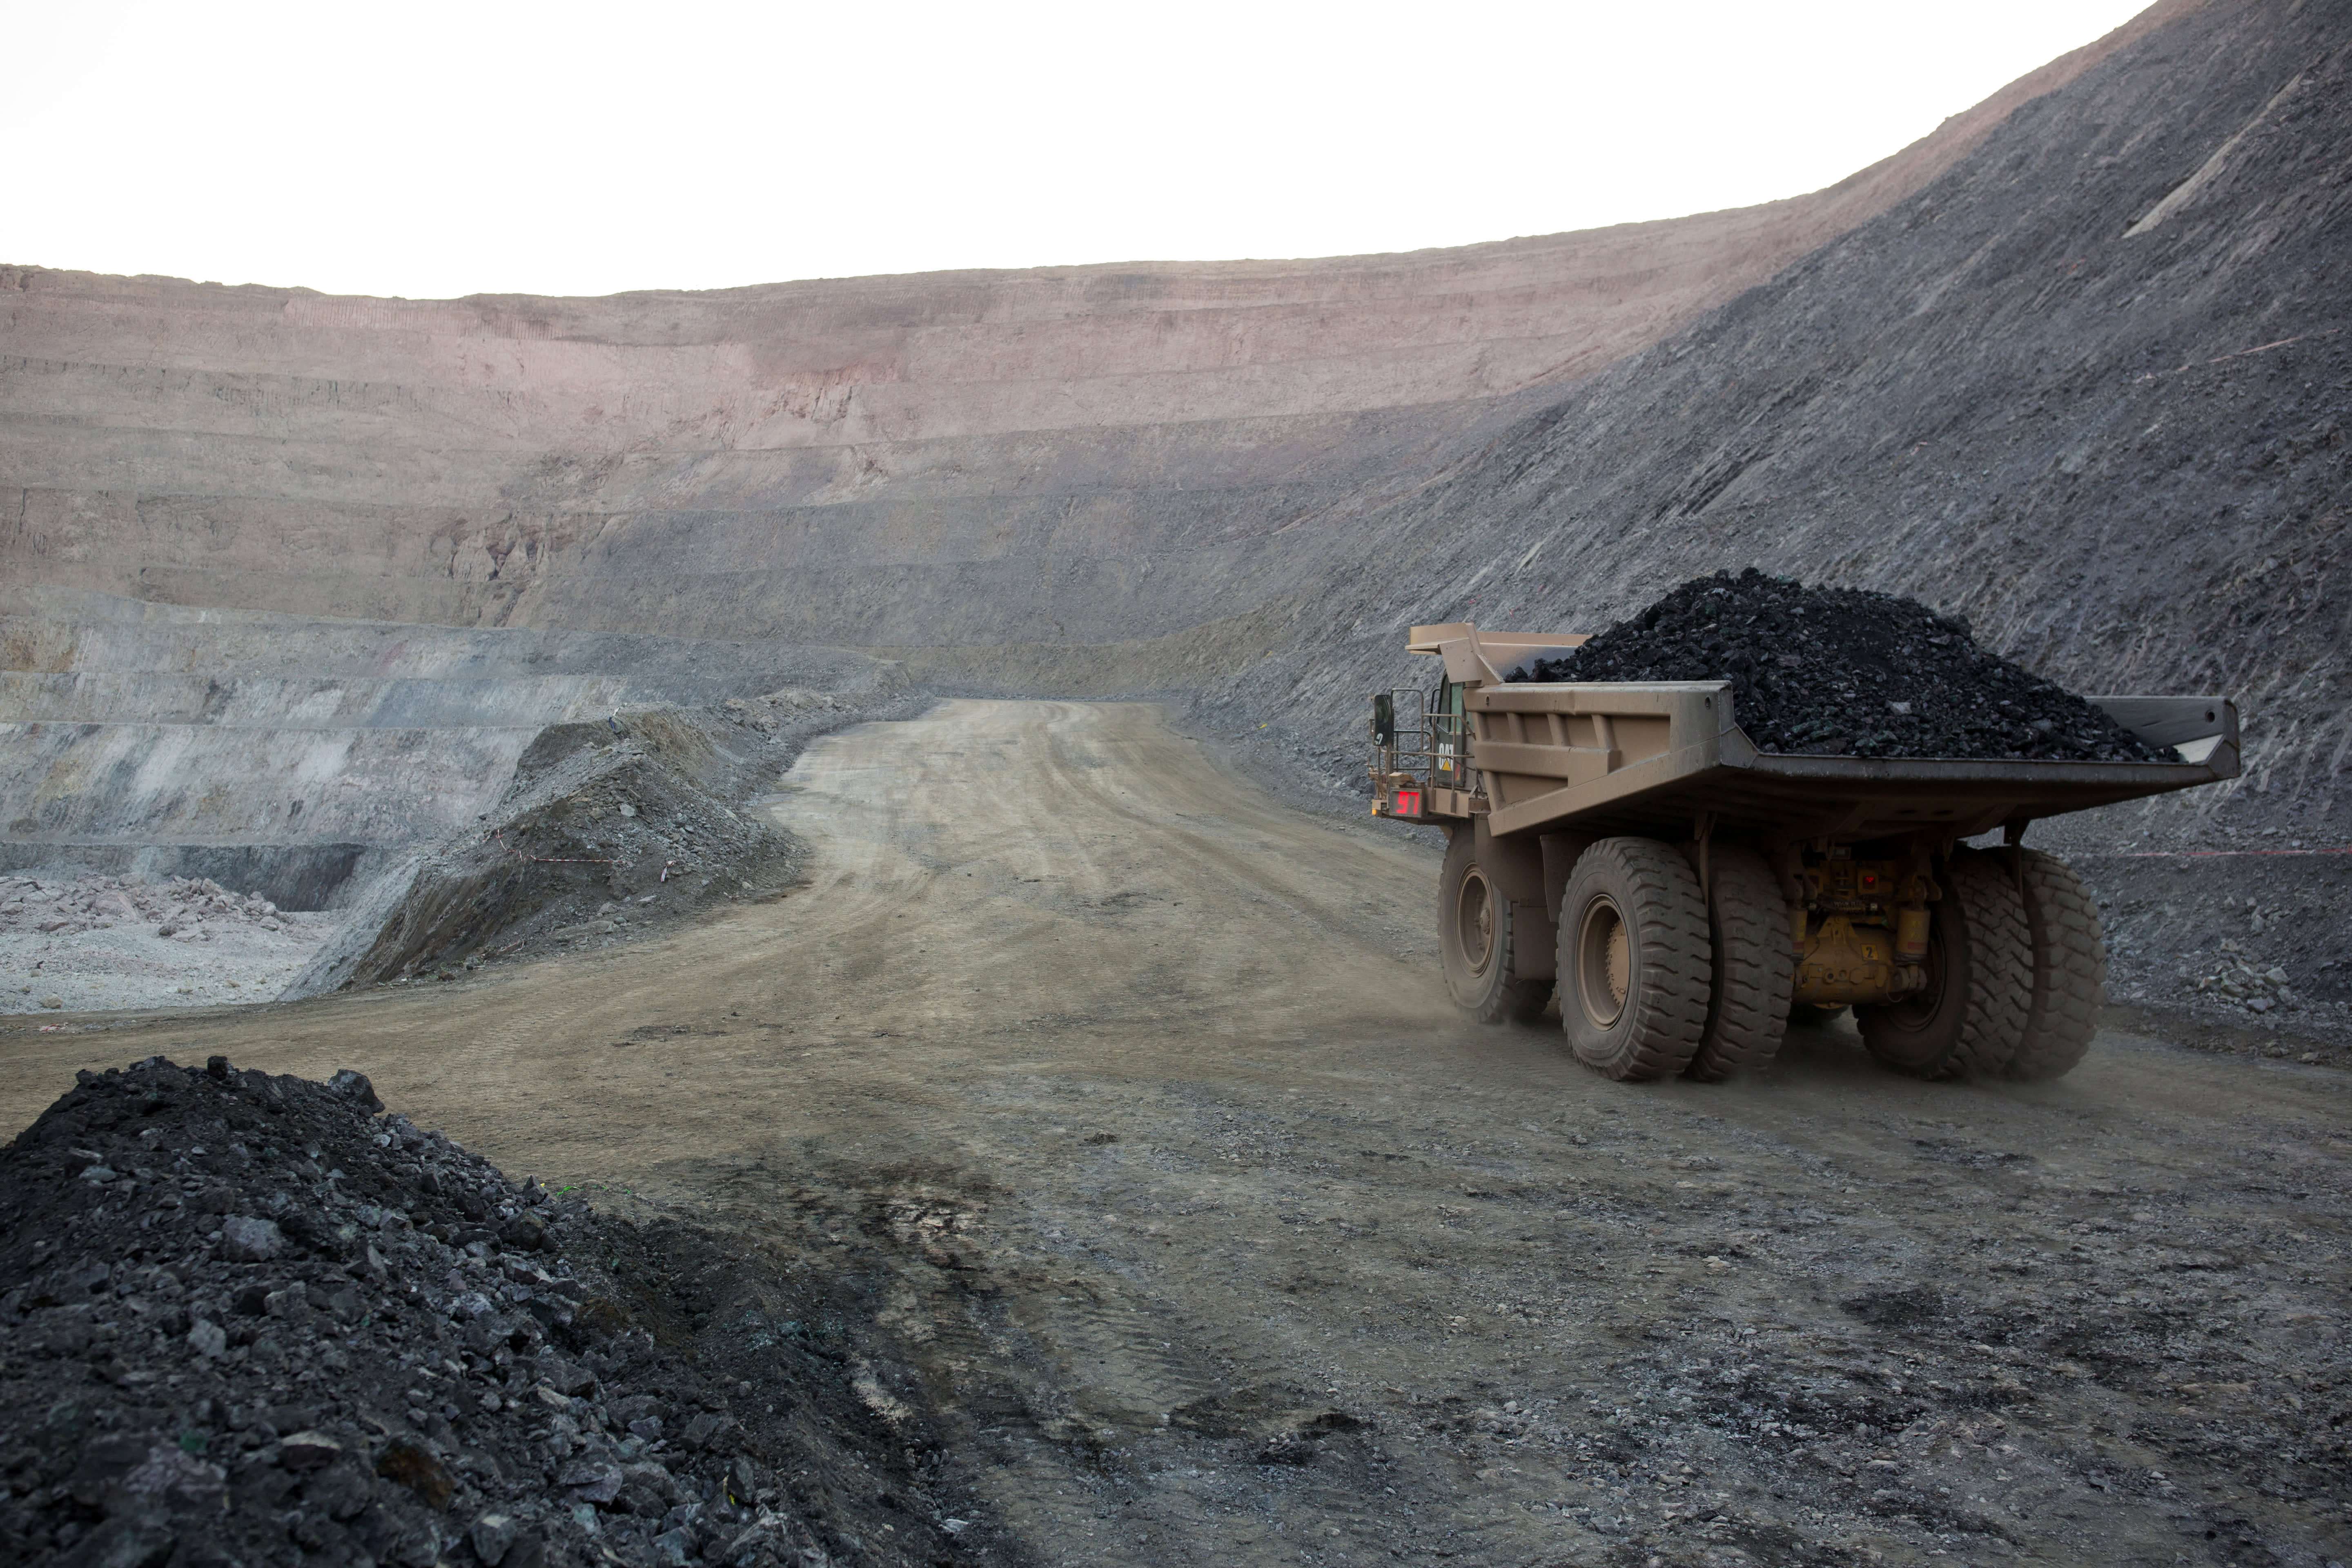 Nationalism over natural resources is rising;  Miners can suffer